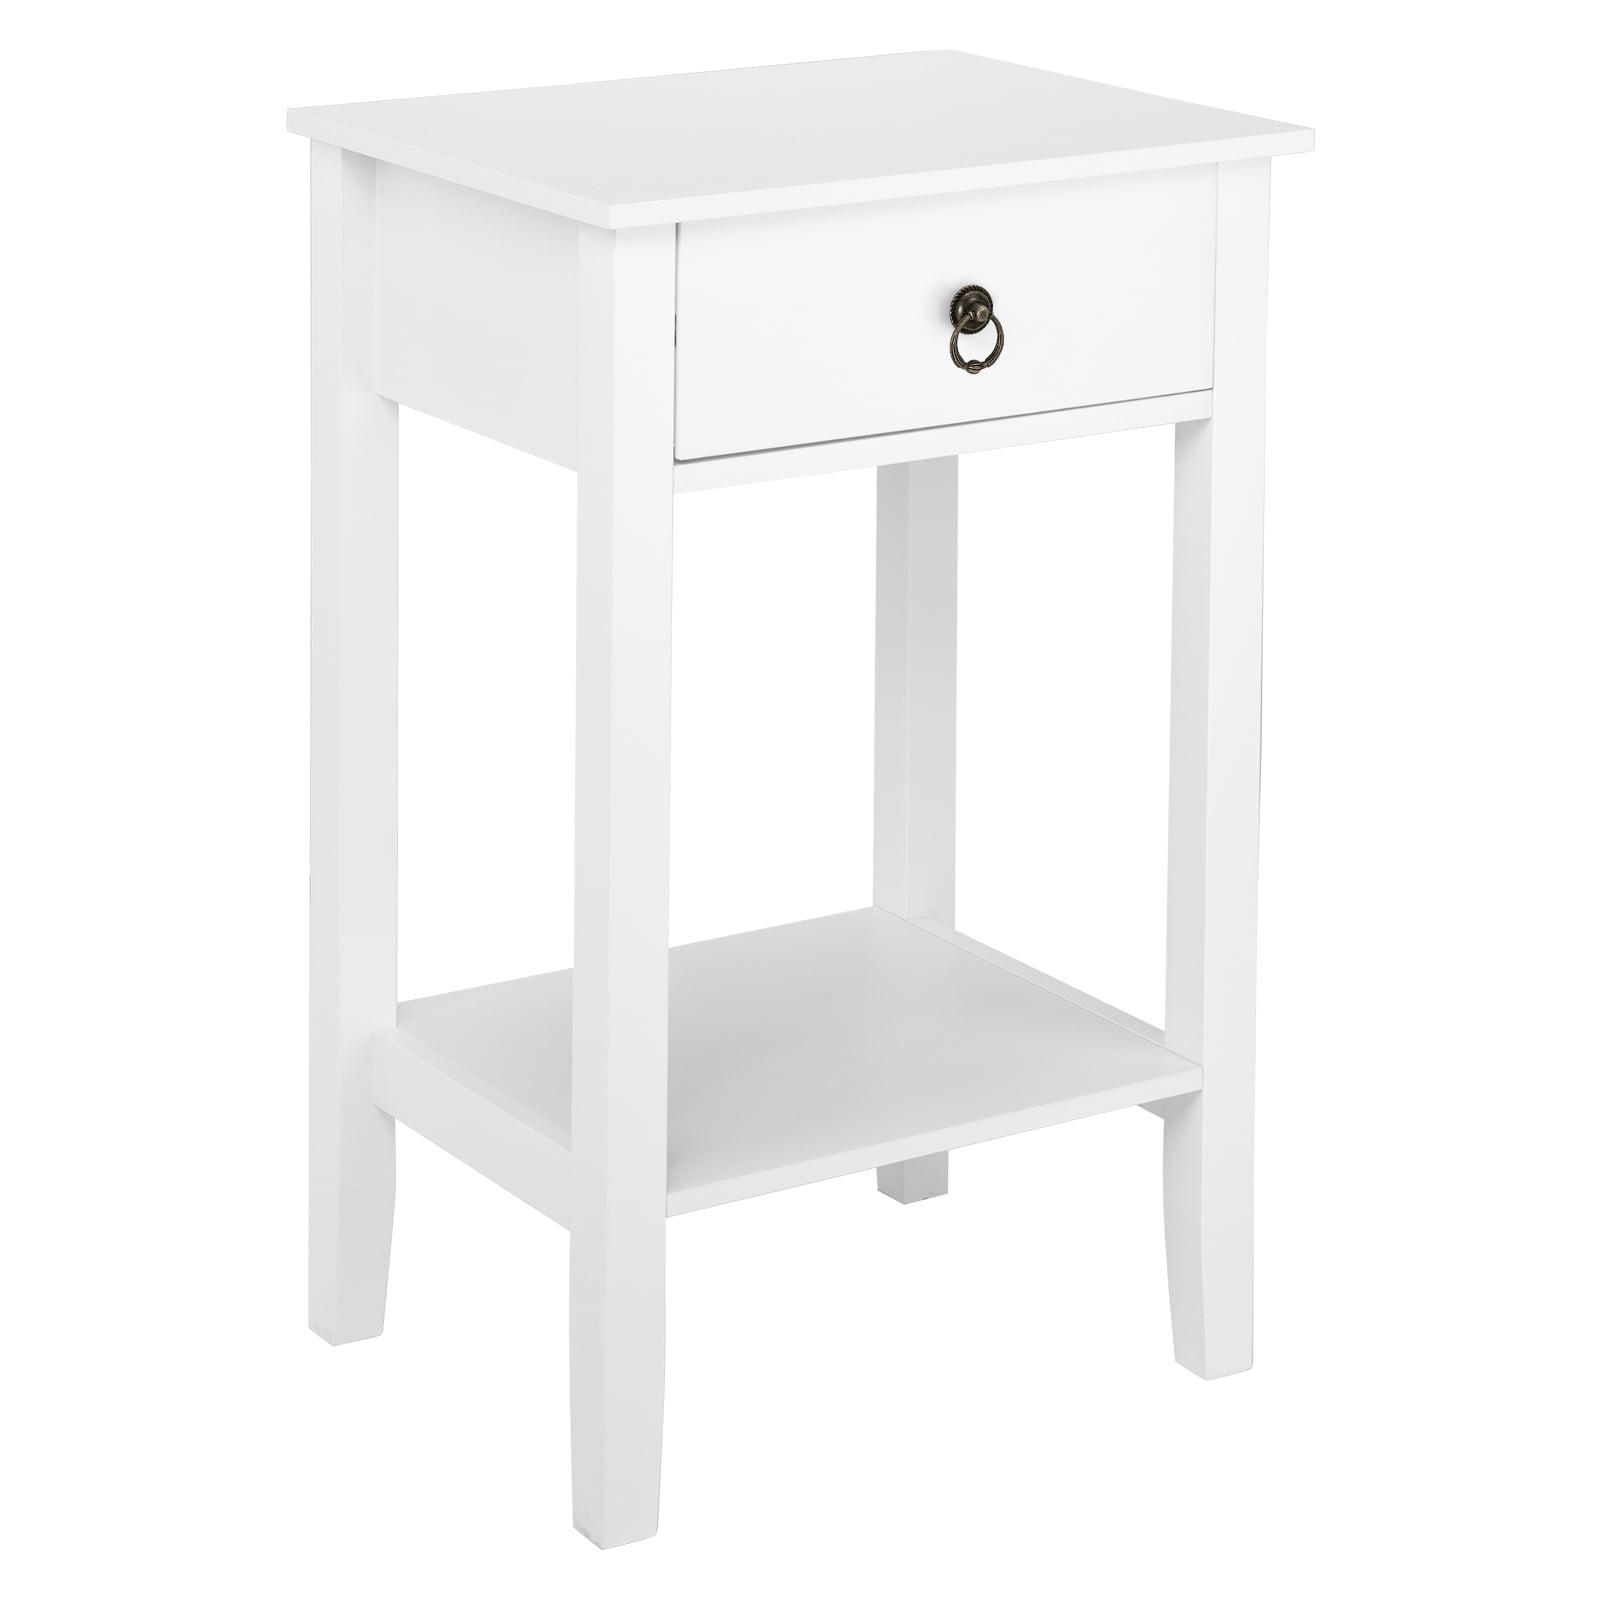 Premium Night Stand End Table with Storage Shelf with DrawerWhite & Black 